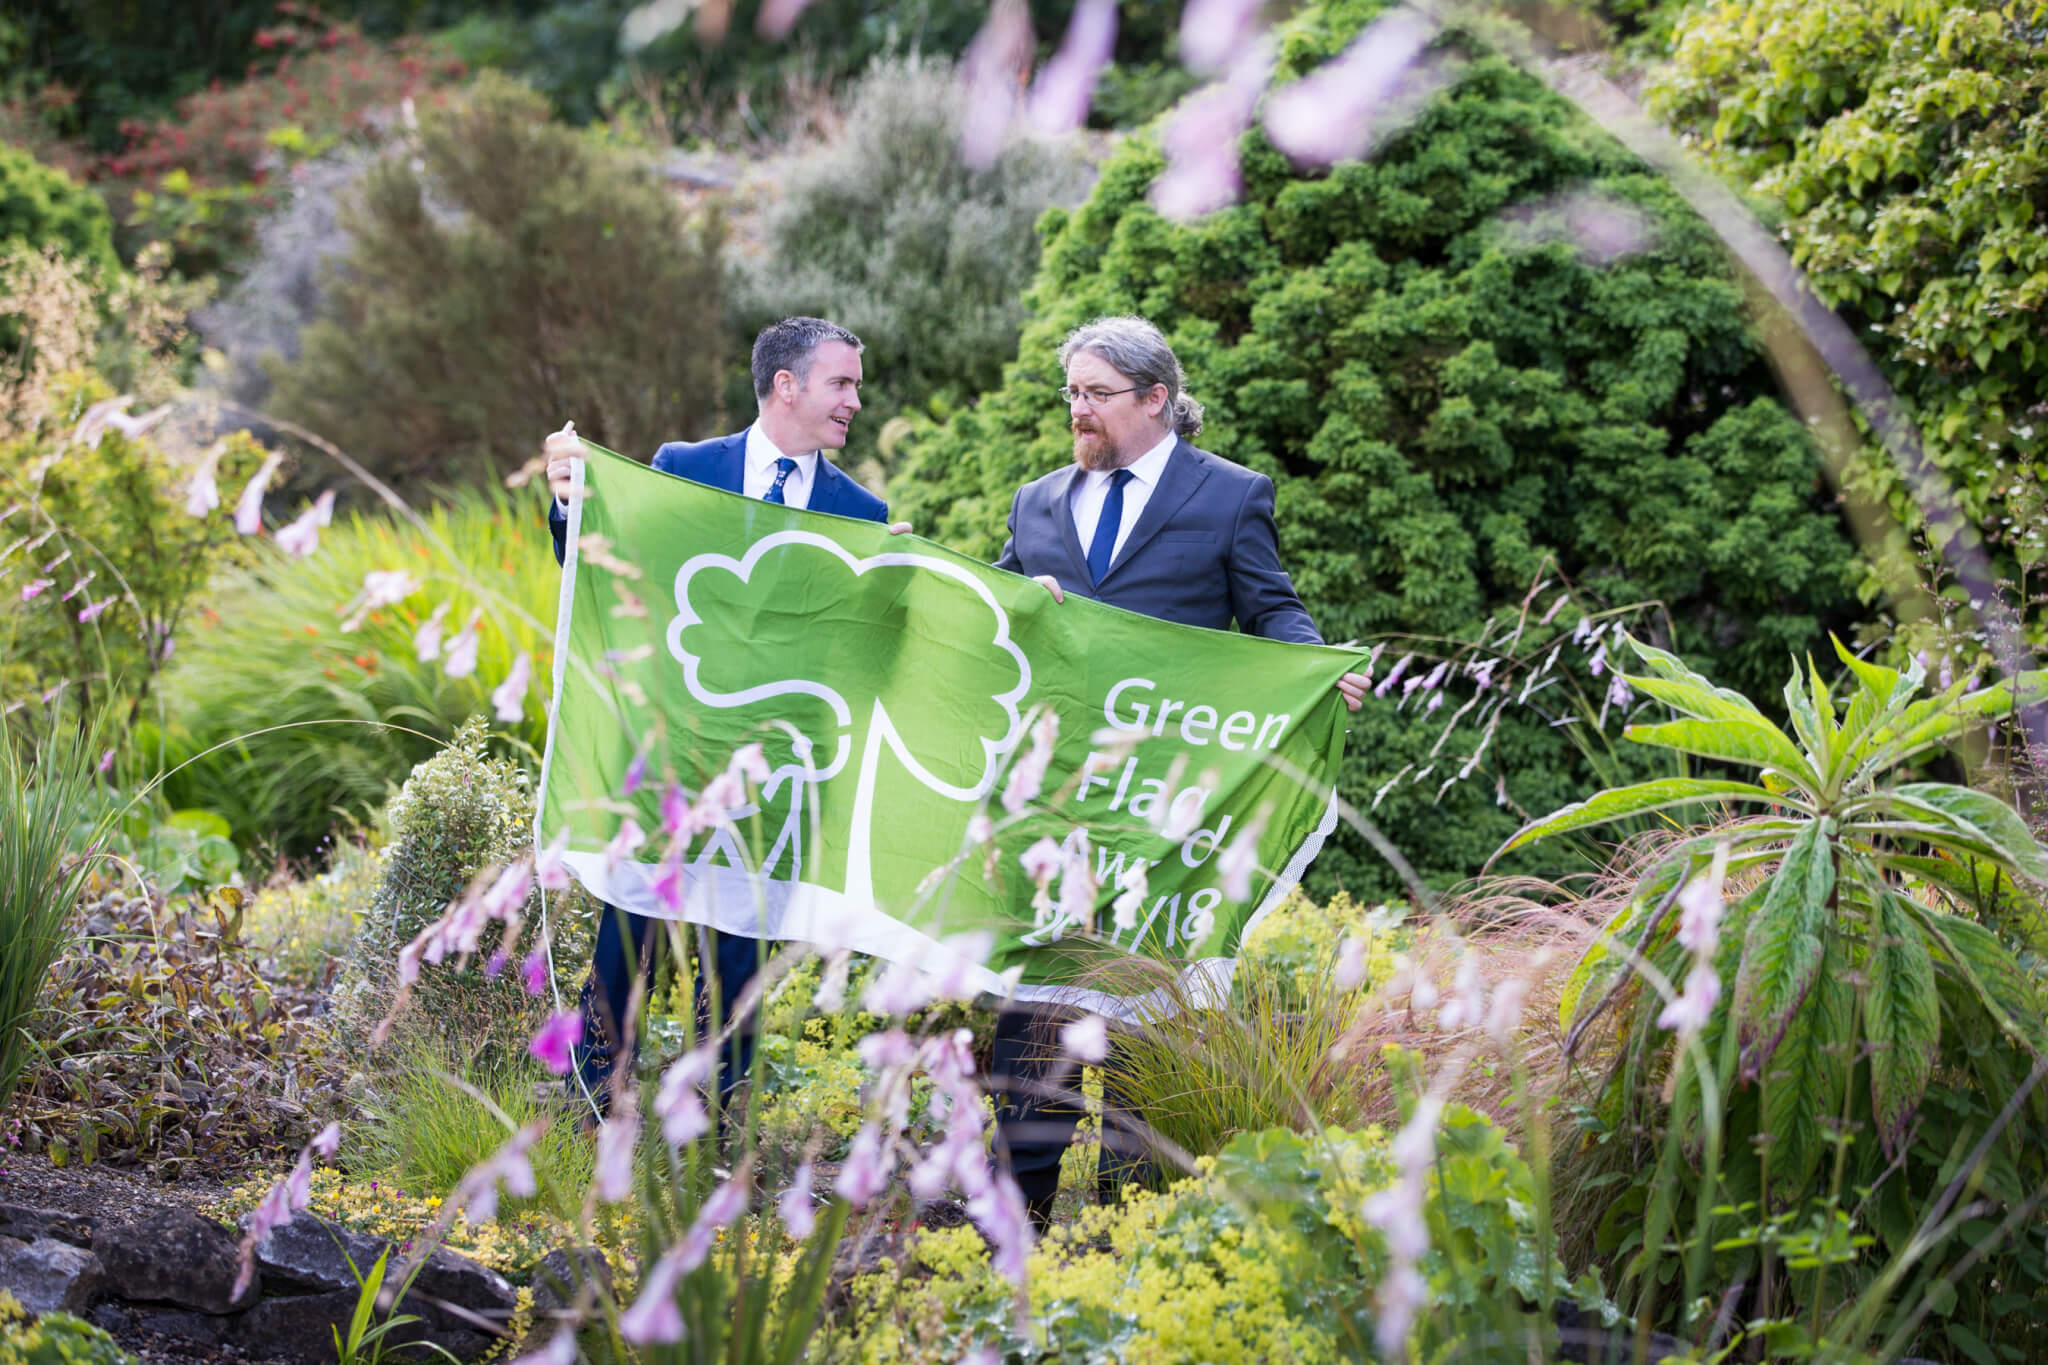 Minister for Housing and Urban Renewal Damien English and Dr Michael John O’Mahony (An Taisce Environmental Education Unit) at the Green Flag Awards for Parks. Photo: Naoise Culhane Photography.